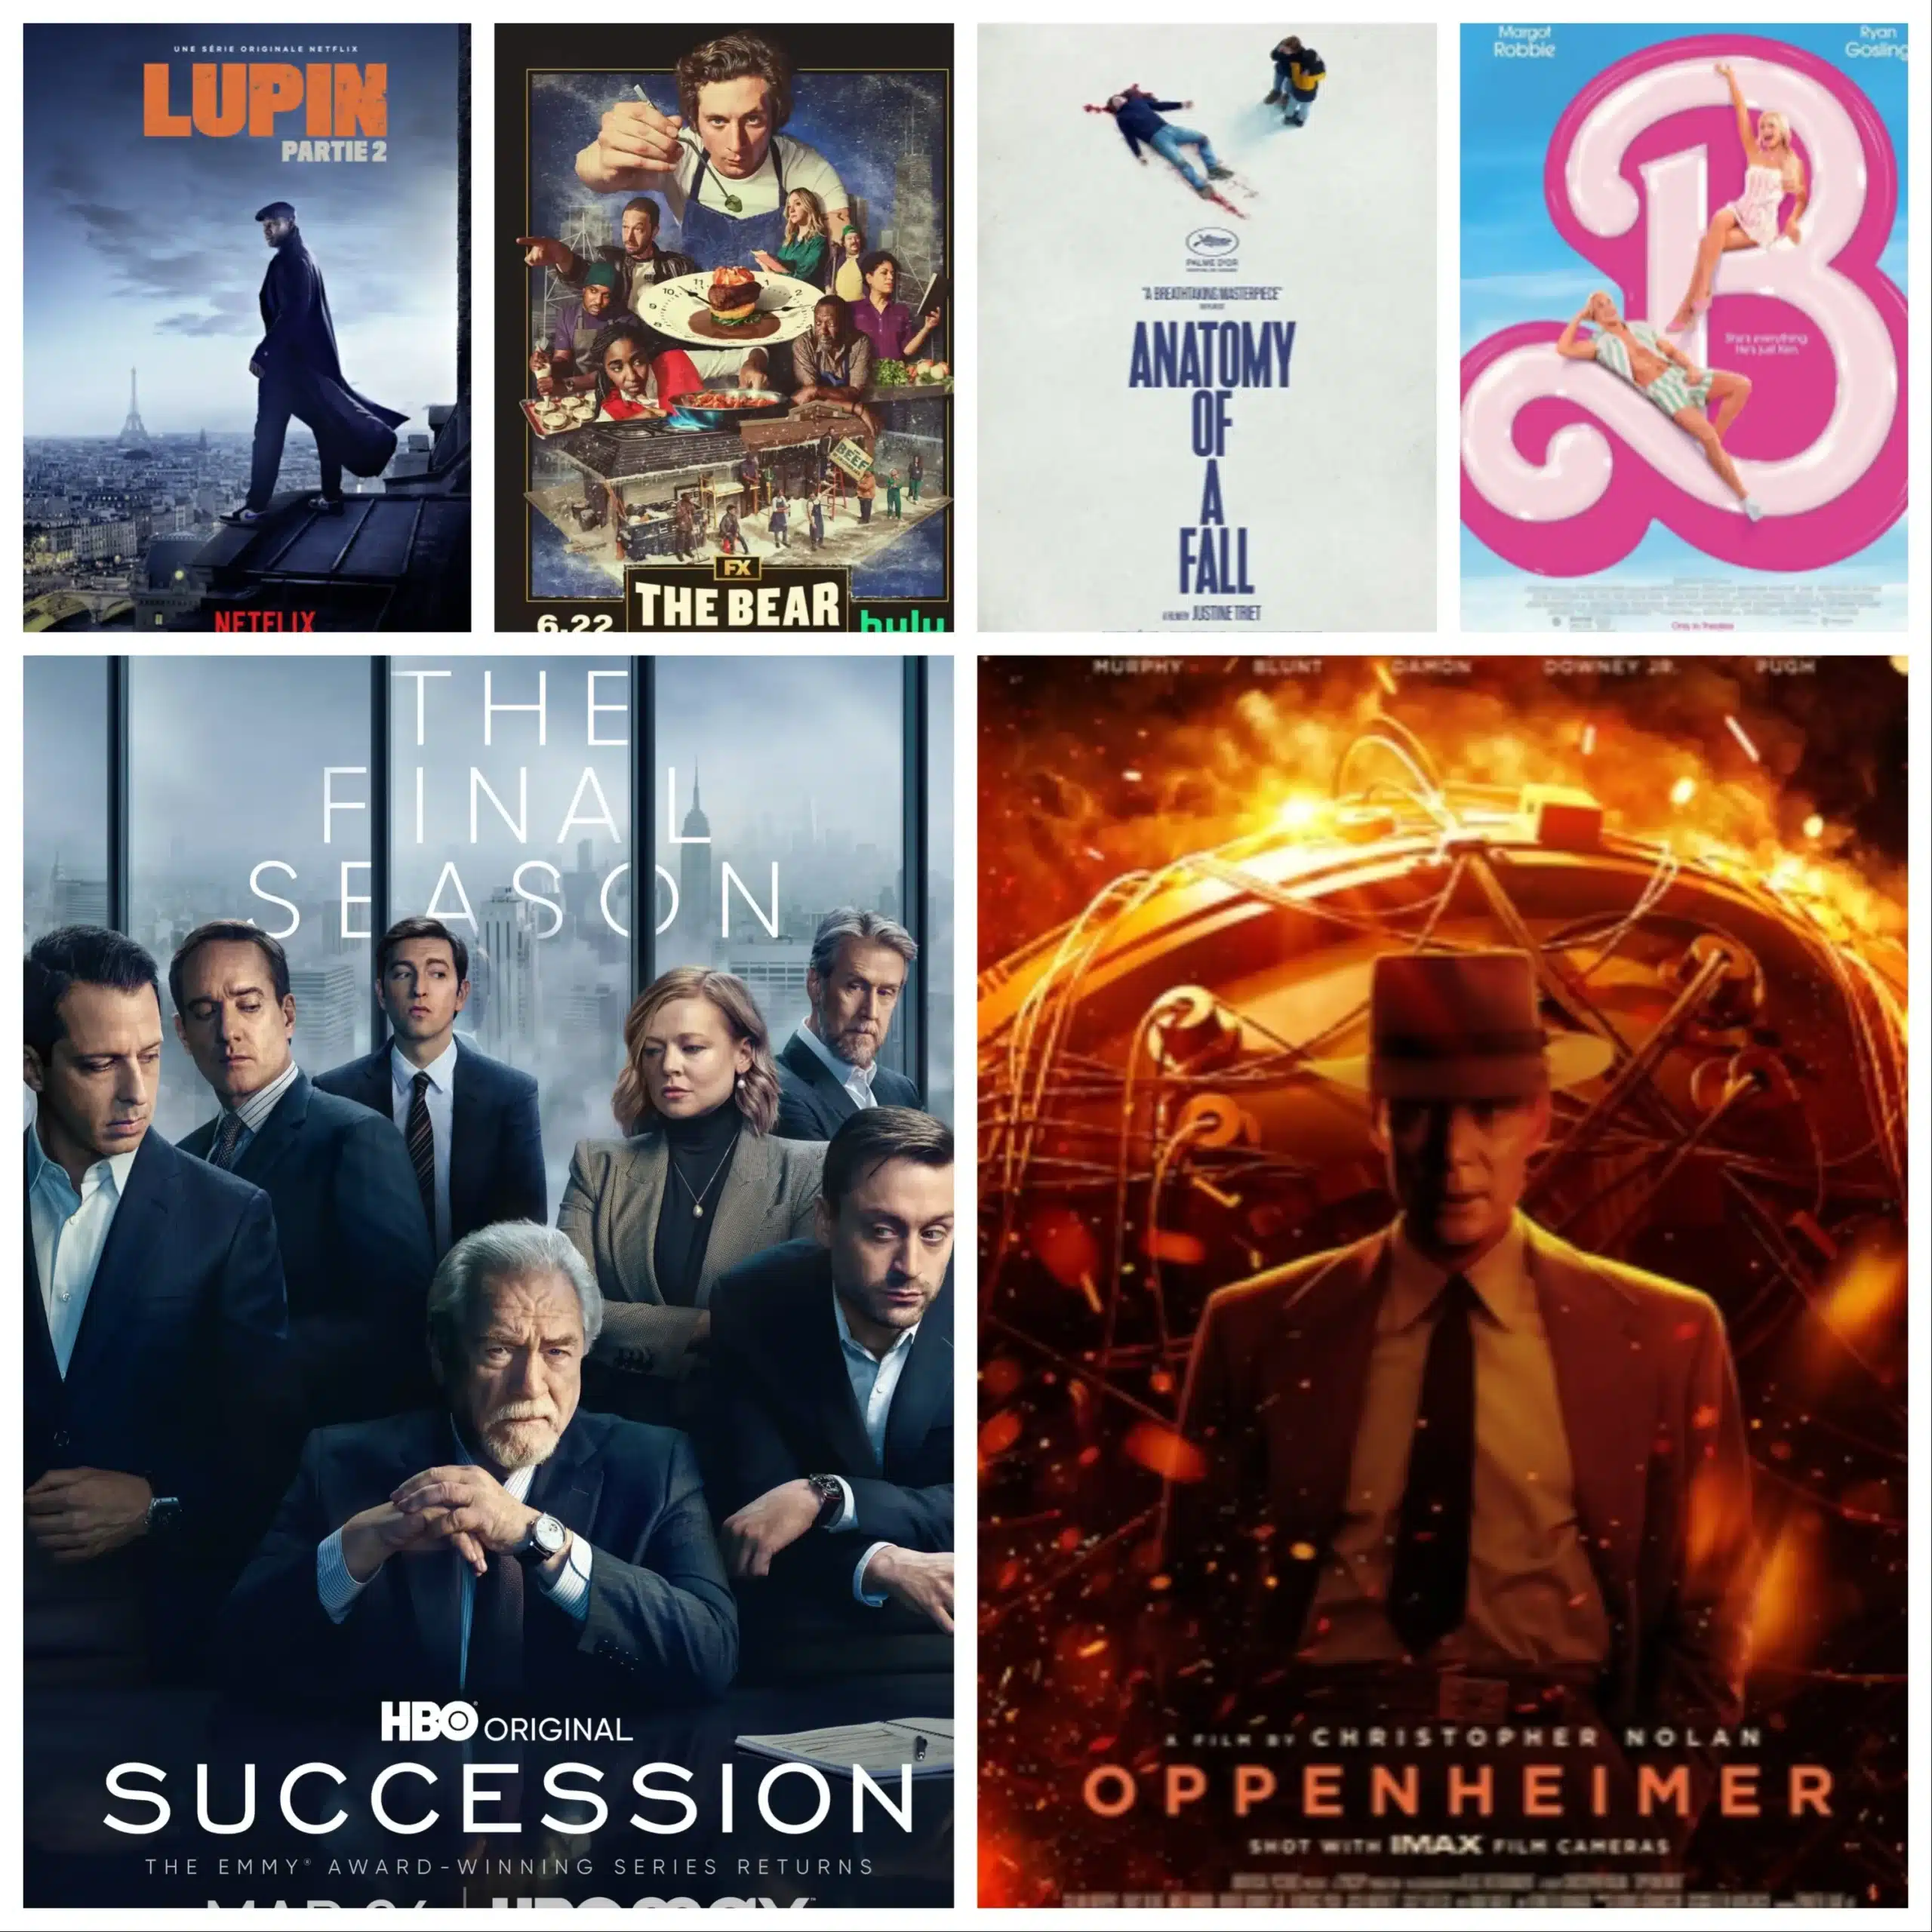 Lupin, The Bear, Succession; Anatomy of a Fall, Barbie, Oppenheimer